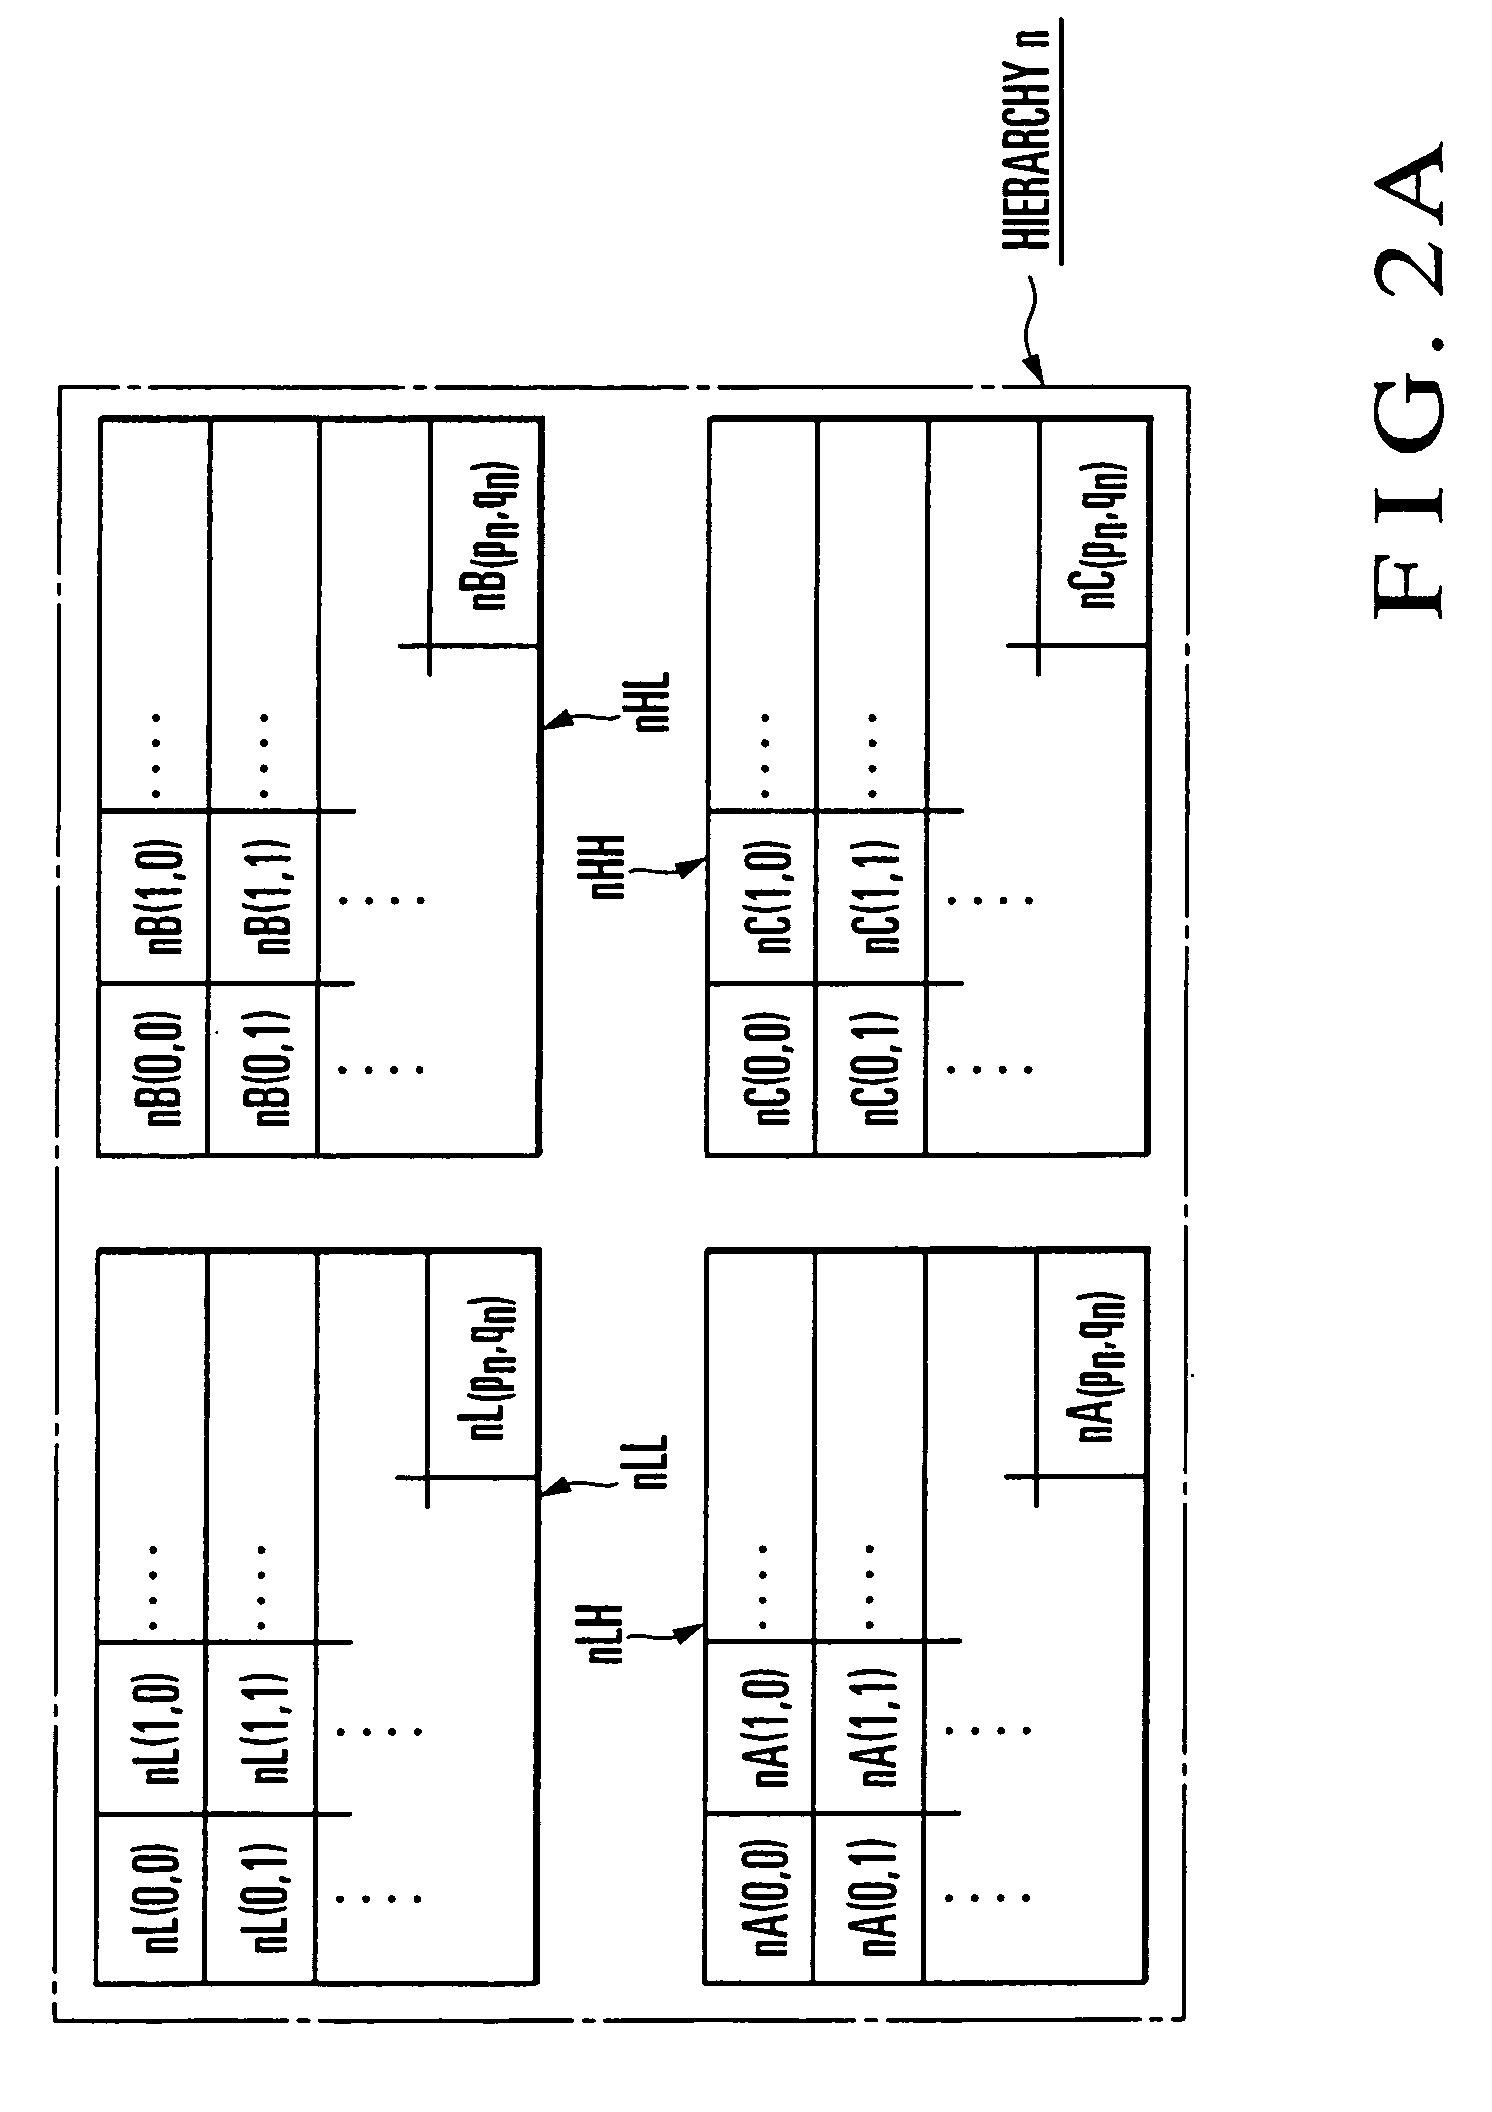 2-Dimensional signal encoding/decoding method and device